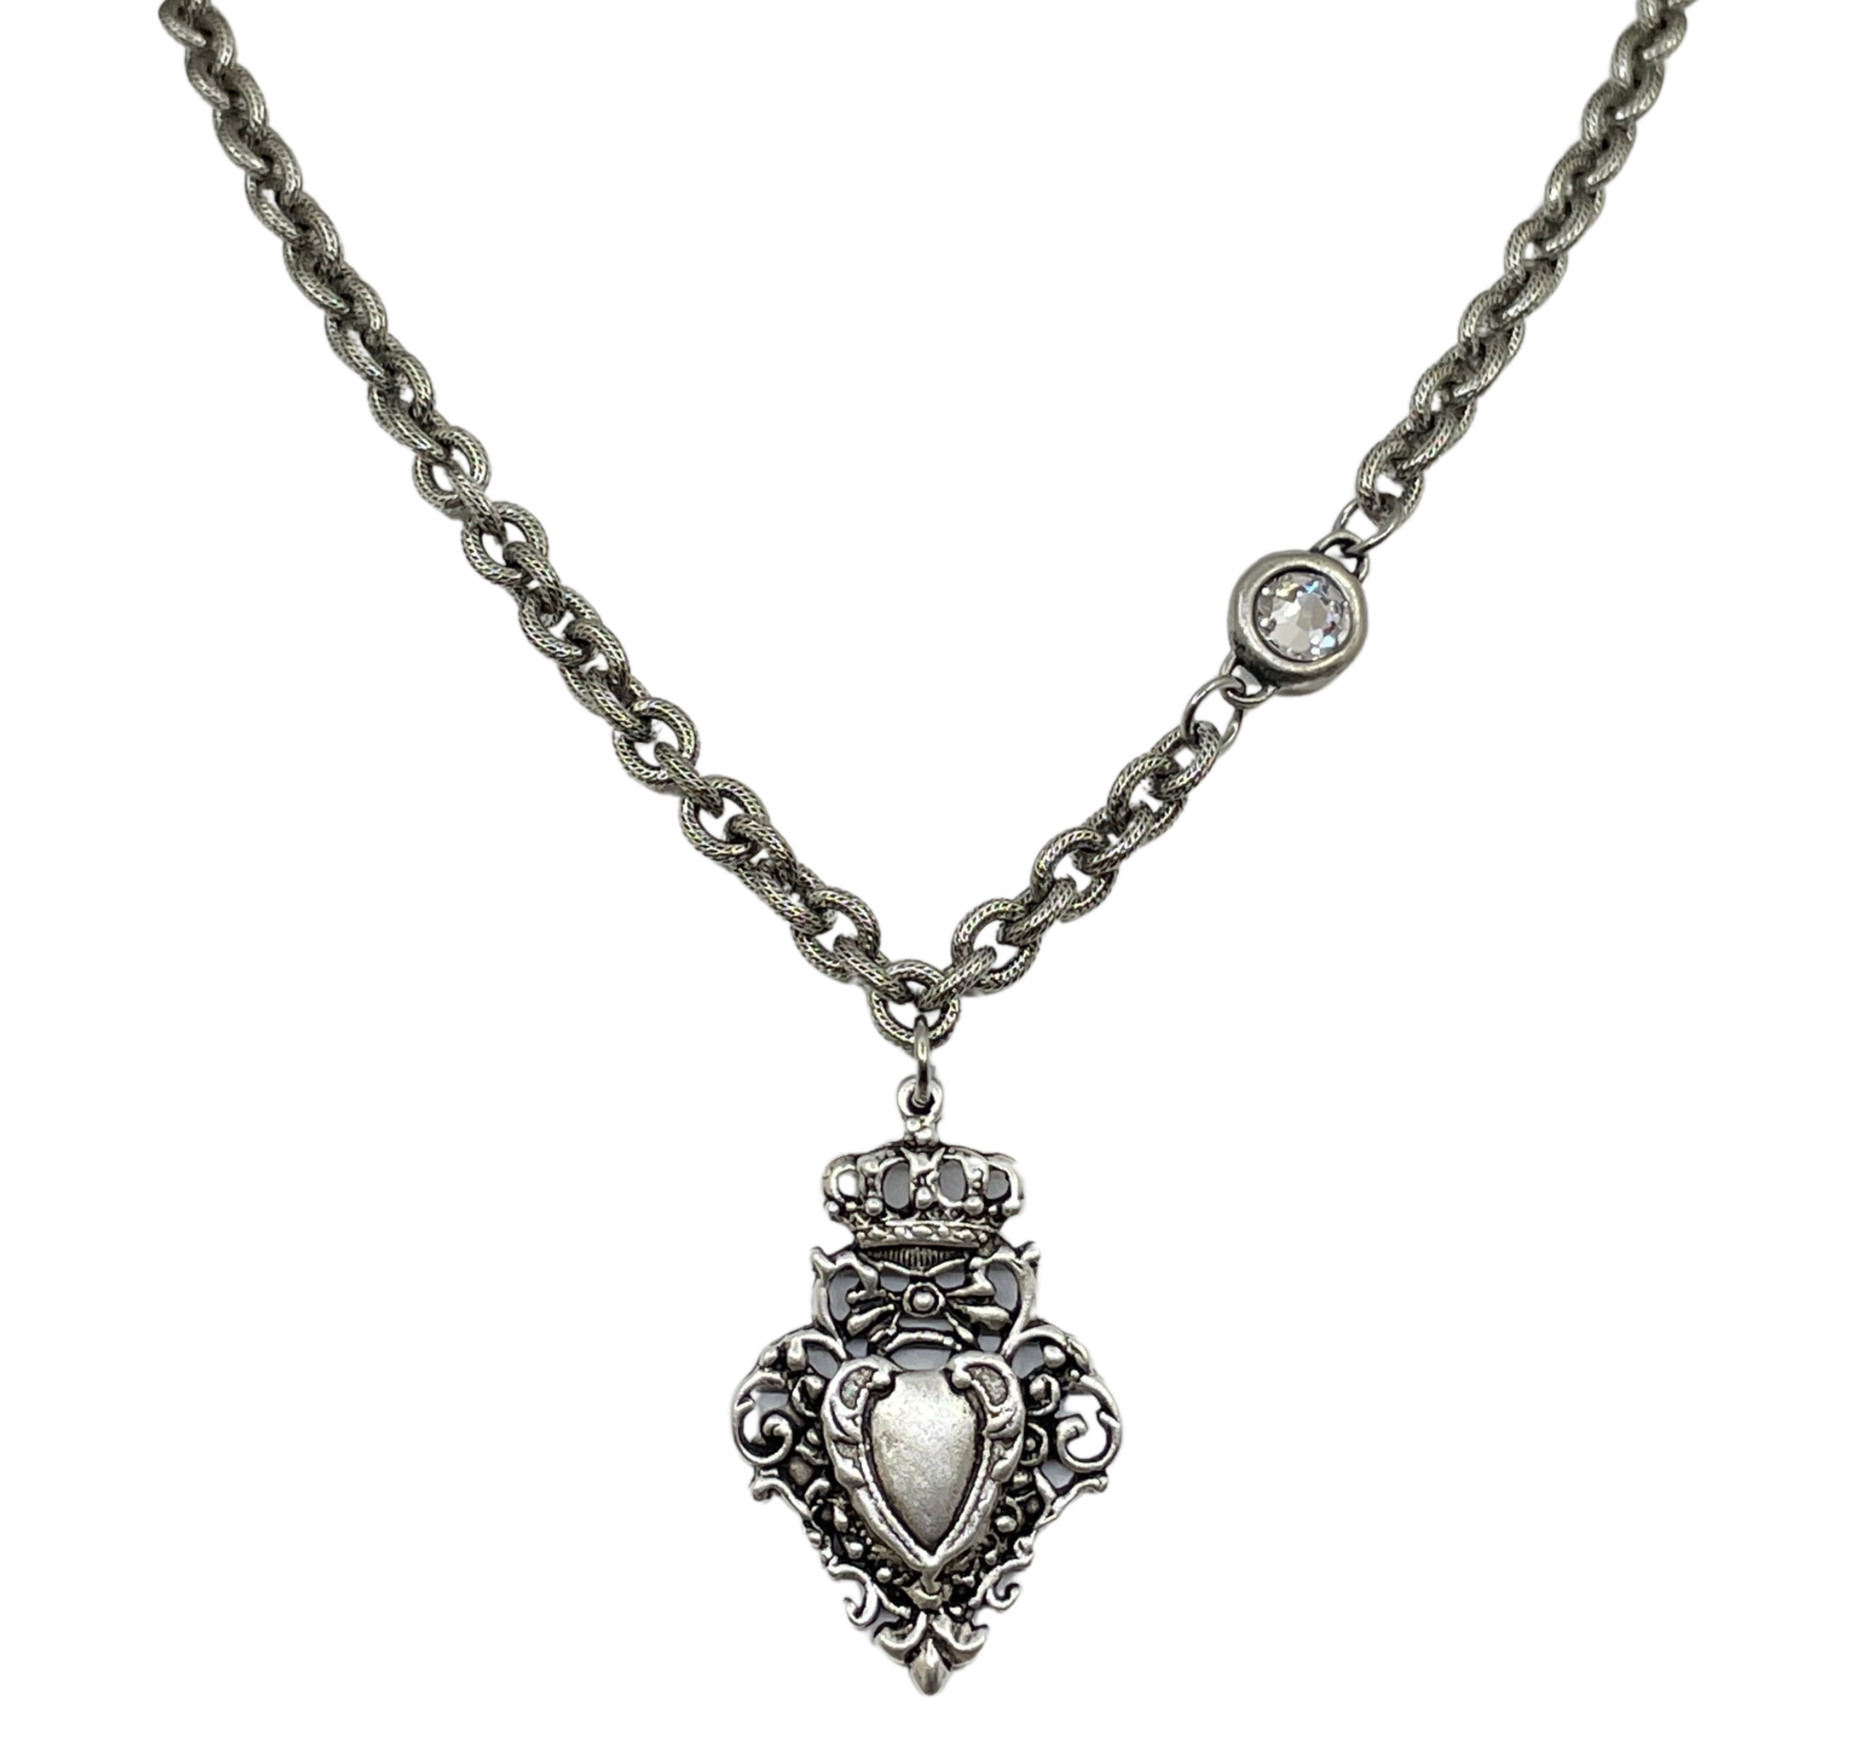 Queen Of Hearts Necklace – HEMLINE French Quarter